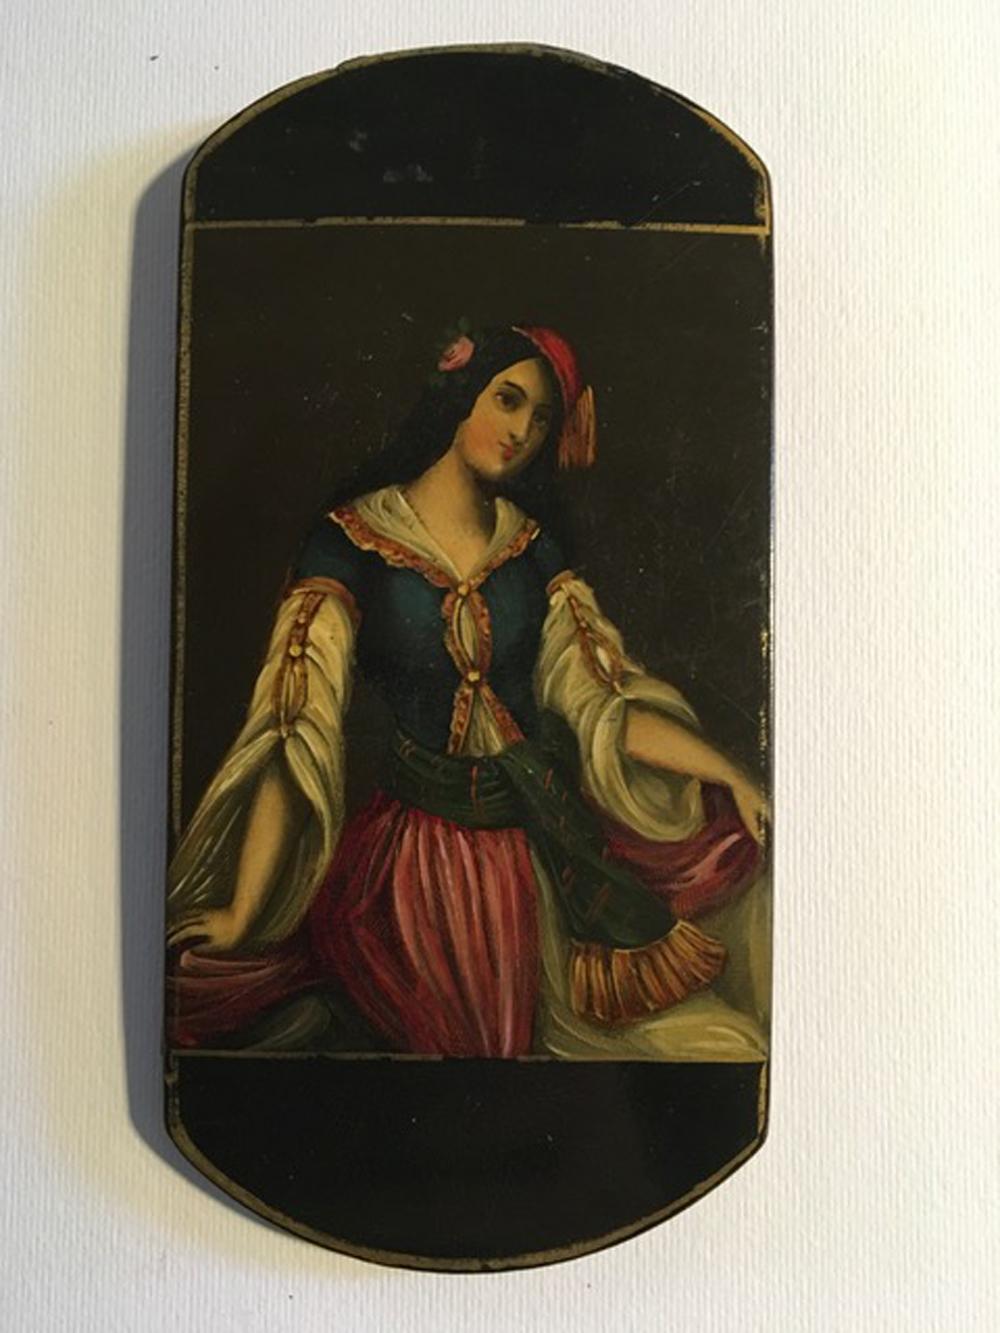 This antique and fine lacquered wood box, is painted on both the sides with an elegant portrait of a woman and on the other side a dancer.

The piece will be delivered with its certificate of Authenticity